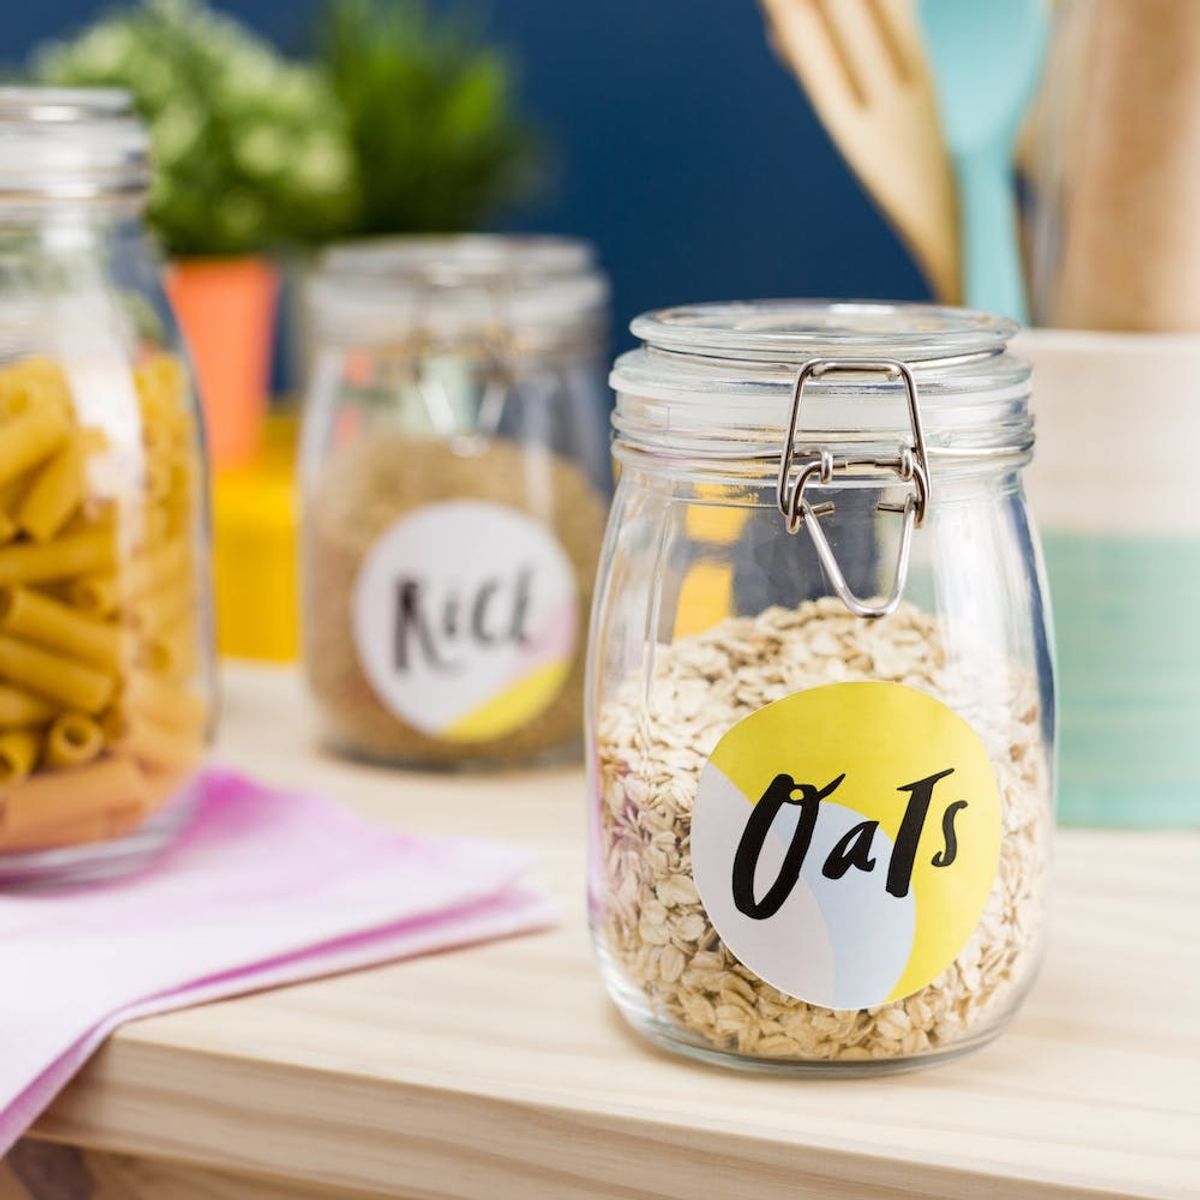 Download These Free Printable Jar Labels to Organize Your Kitchen Pantry